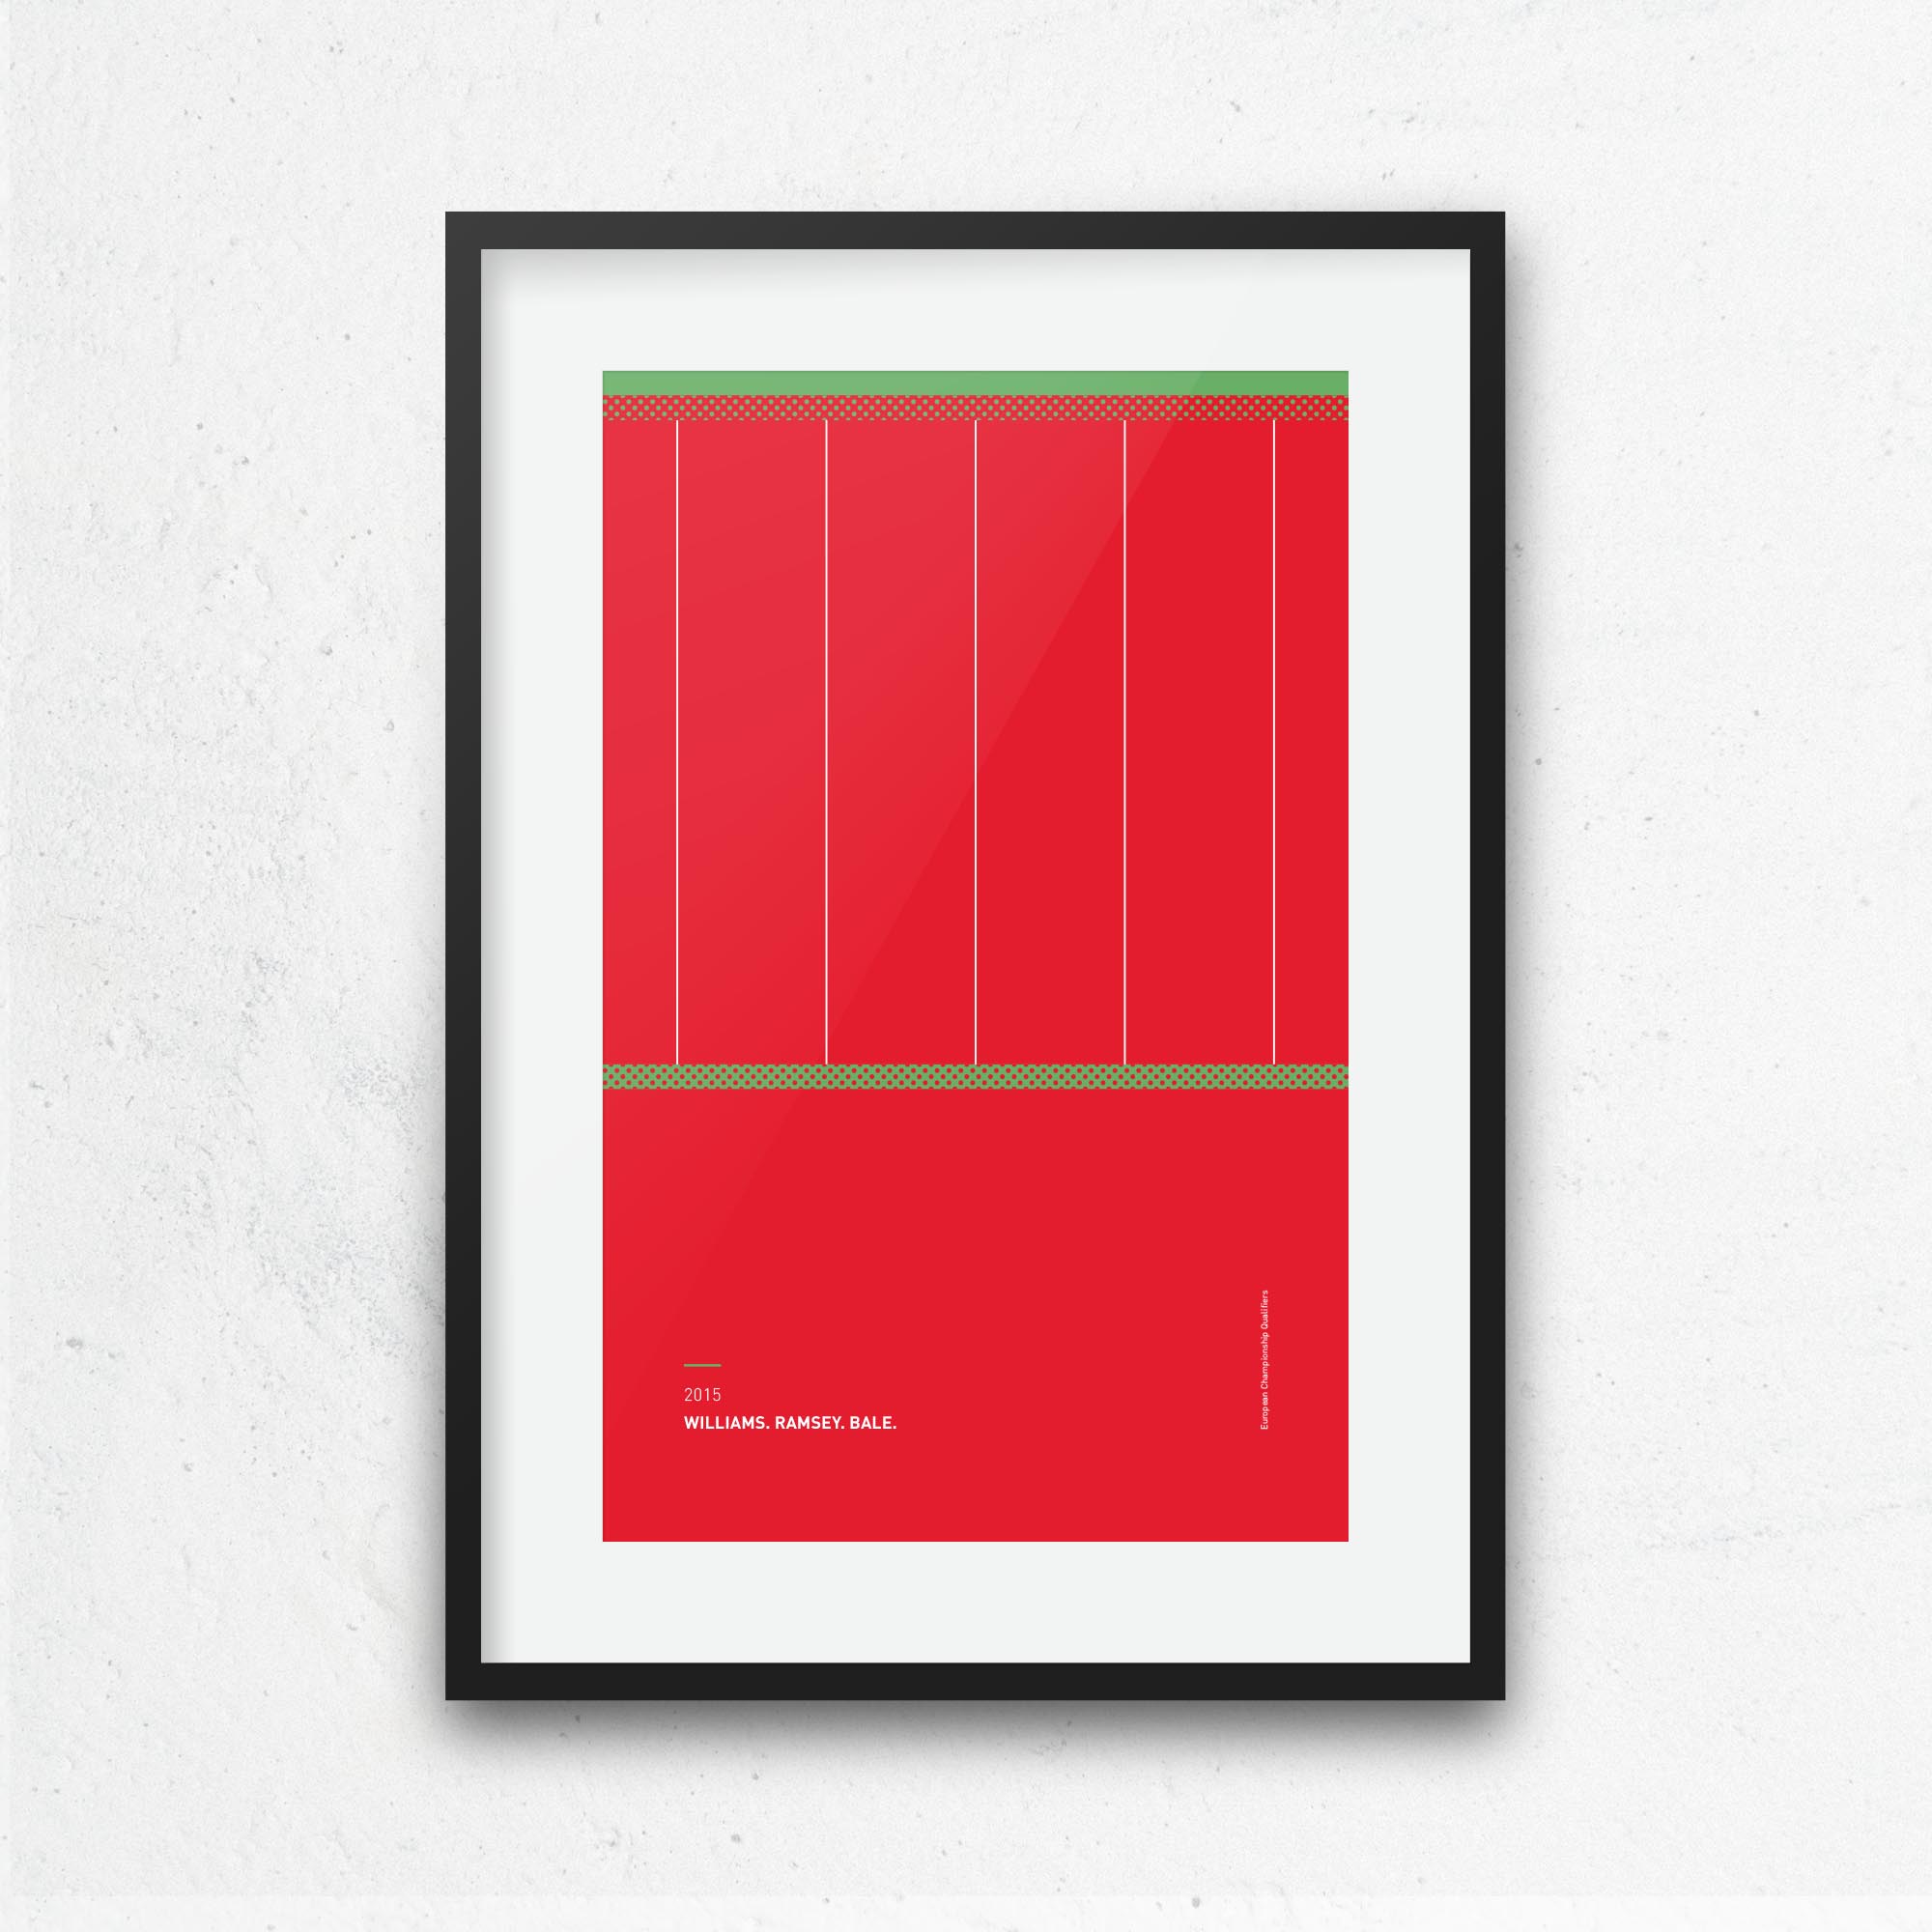 Wales 2015 'Better Days' Football Print Good Team On Paper